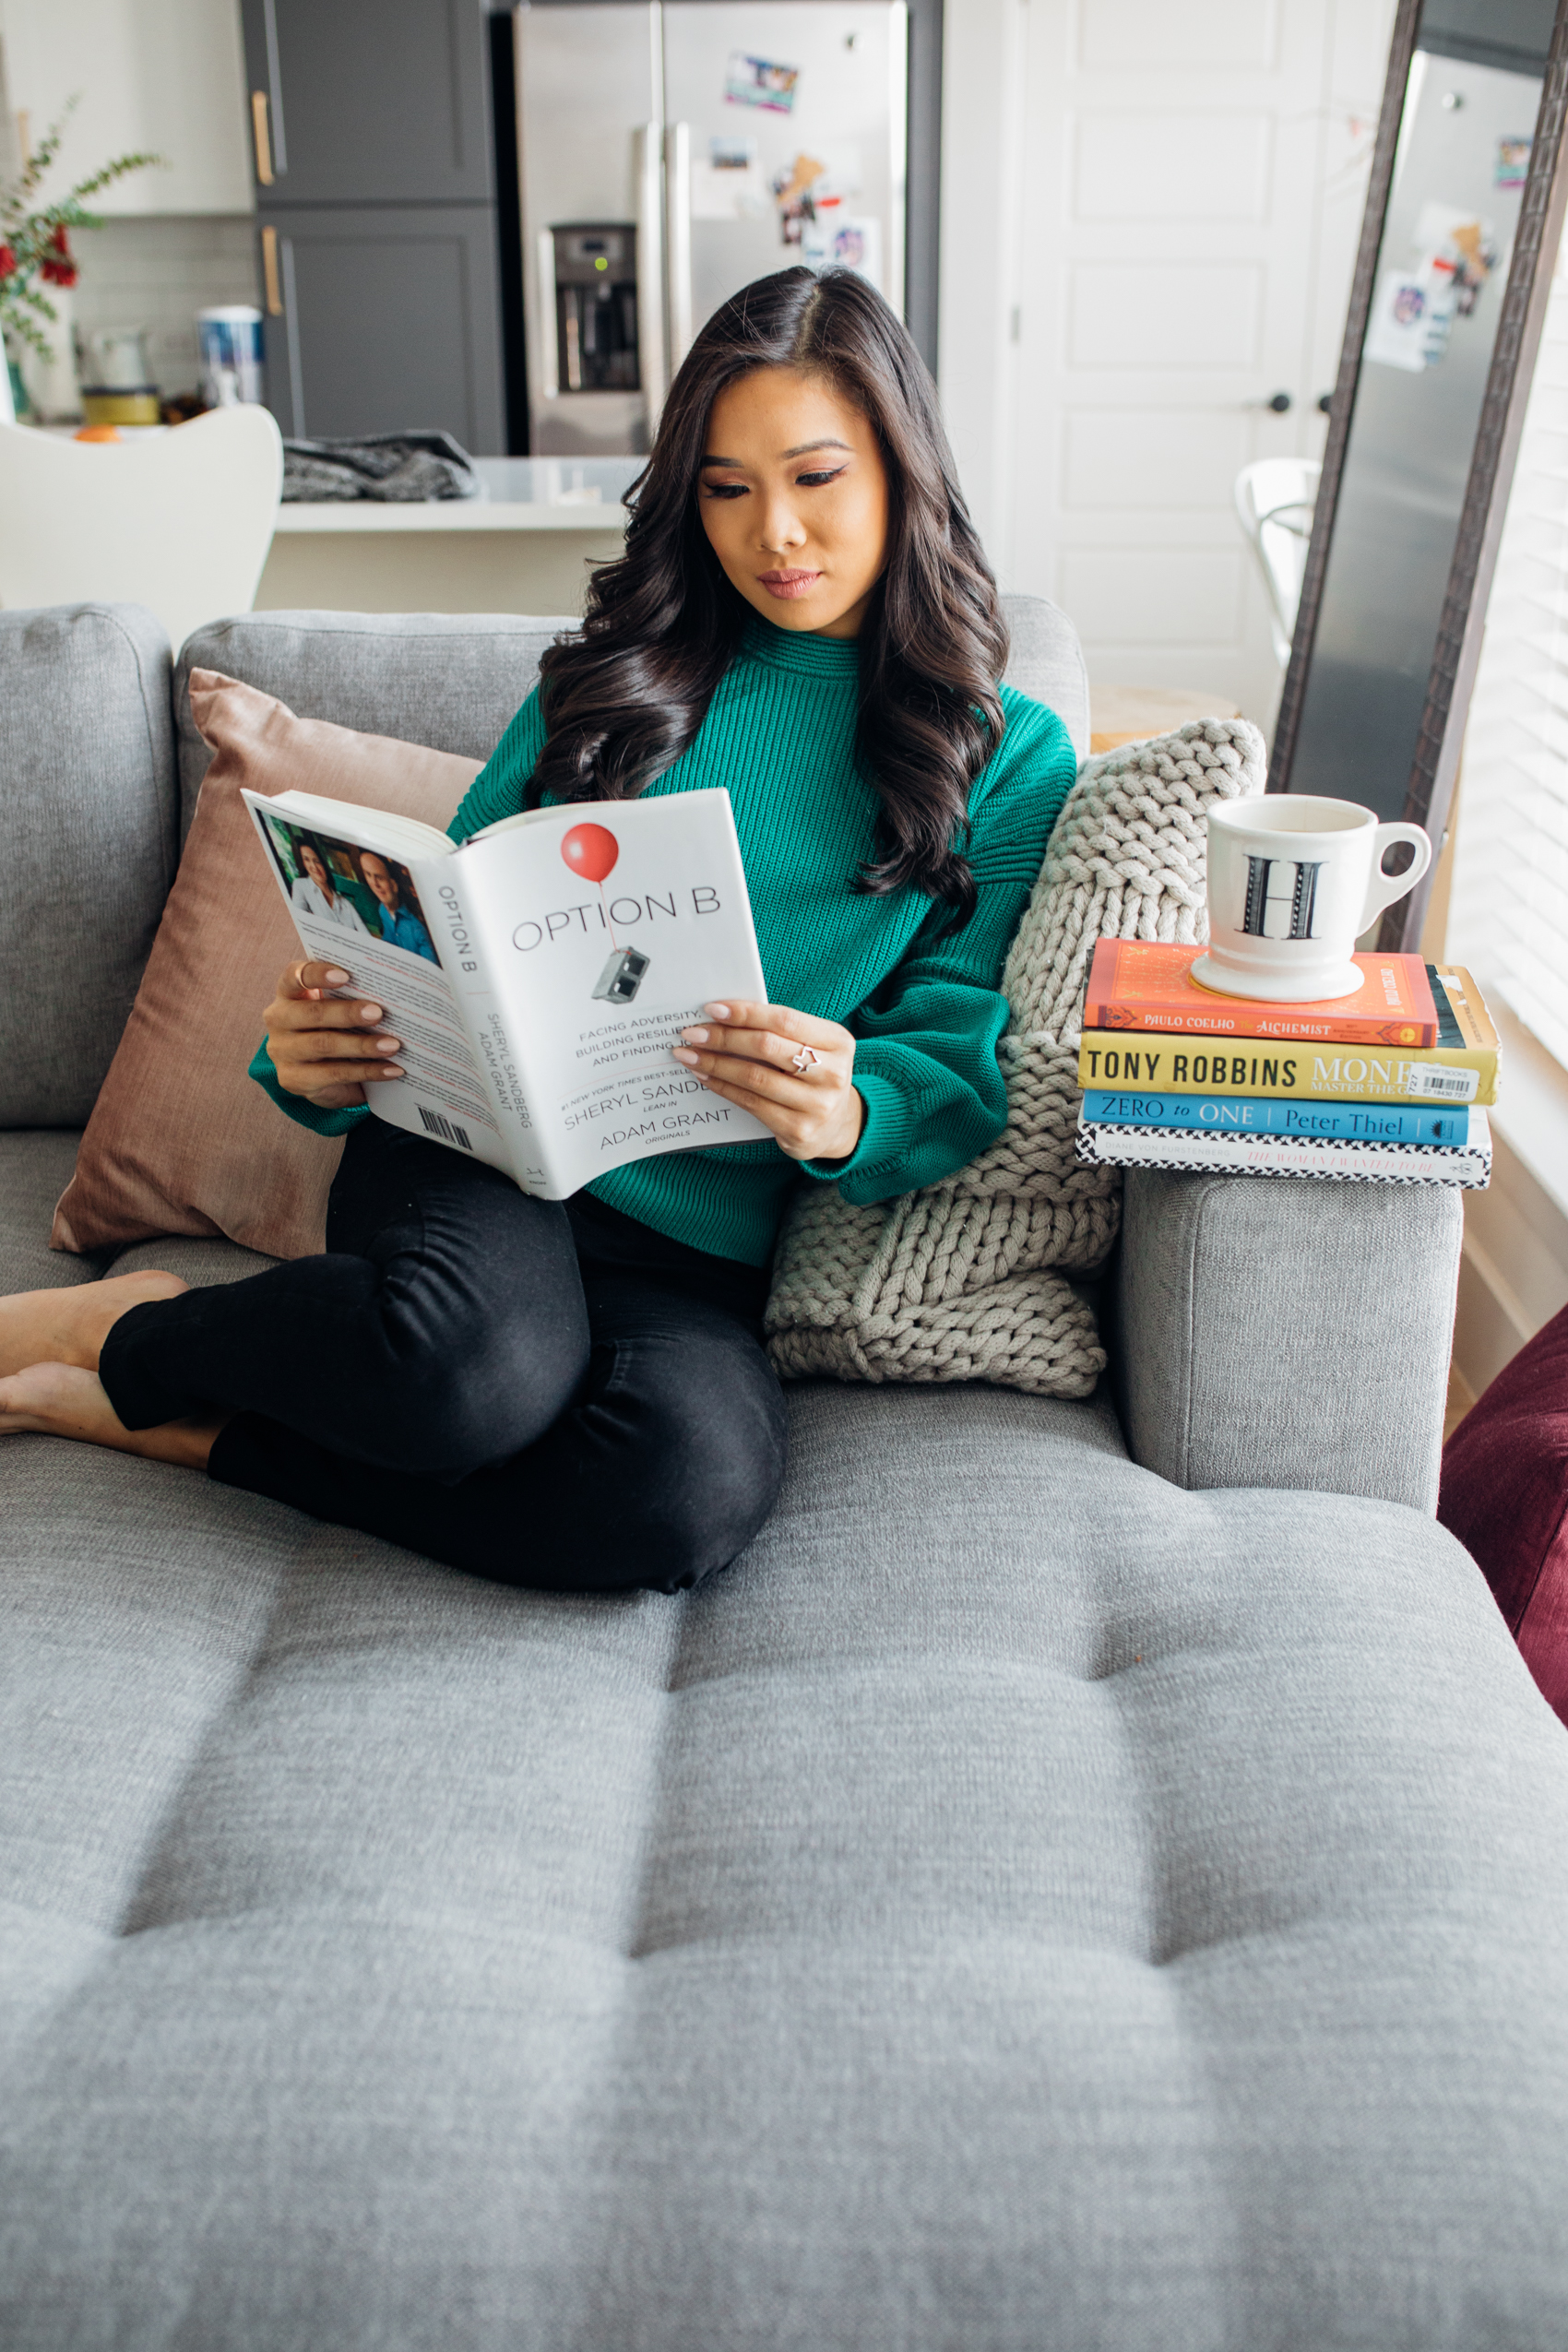 Blogger Hoang-Kim recommends five books everyone should read